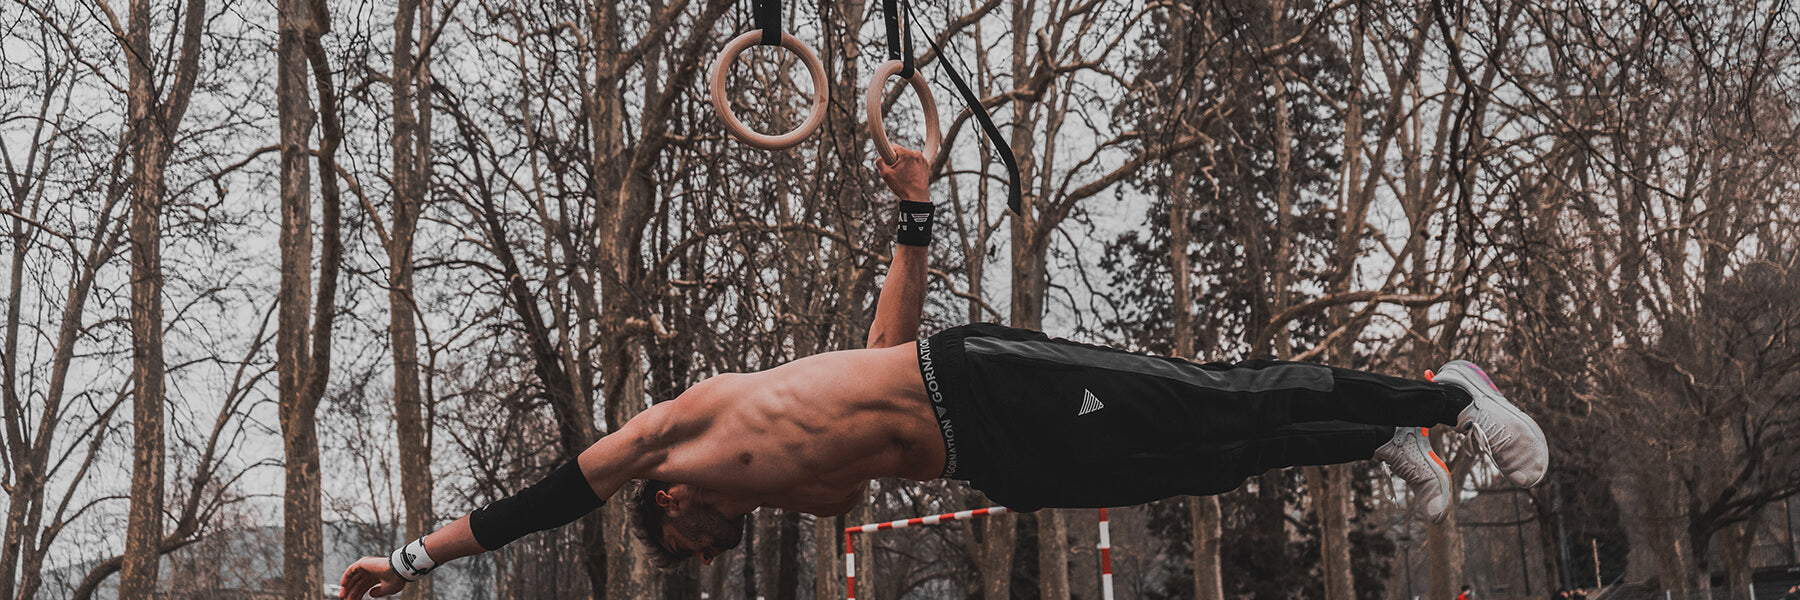 Calisthenics Skills: These 10 Exercises You Must Know!